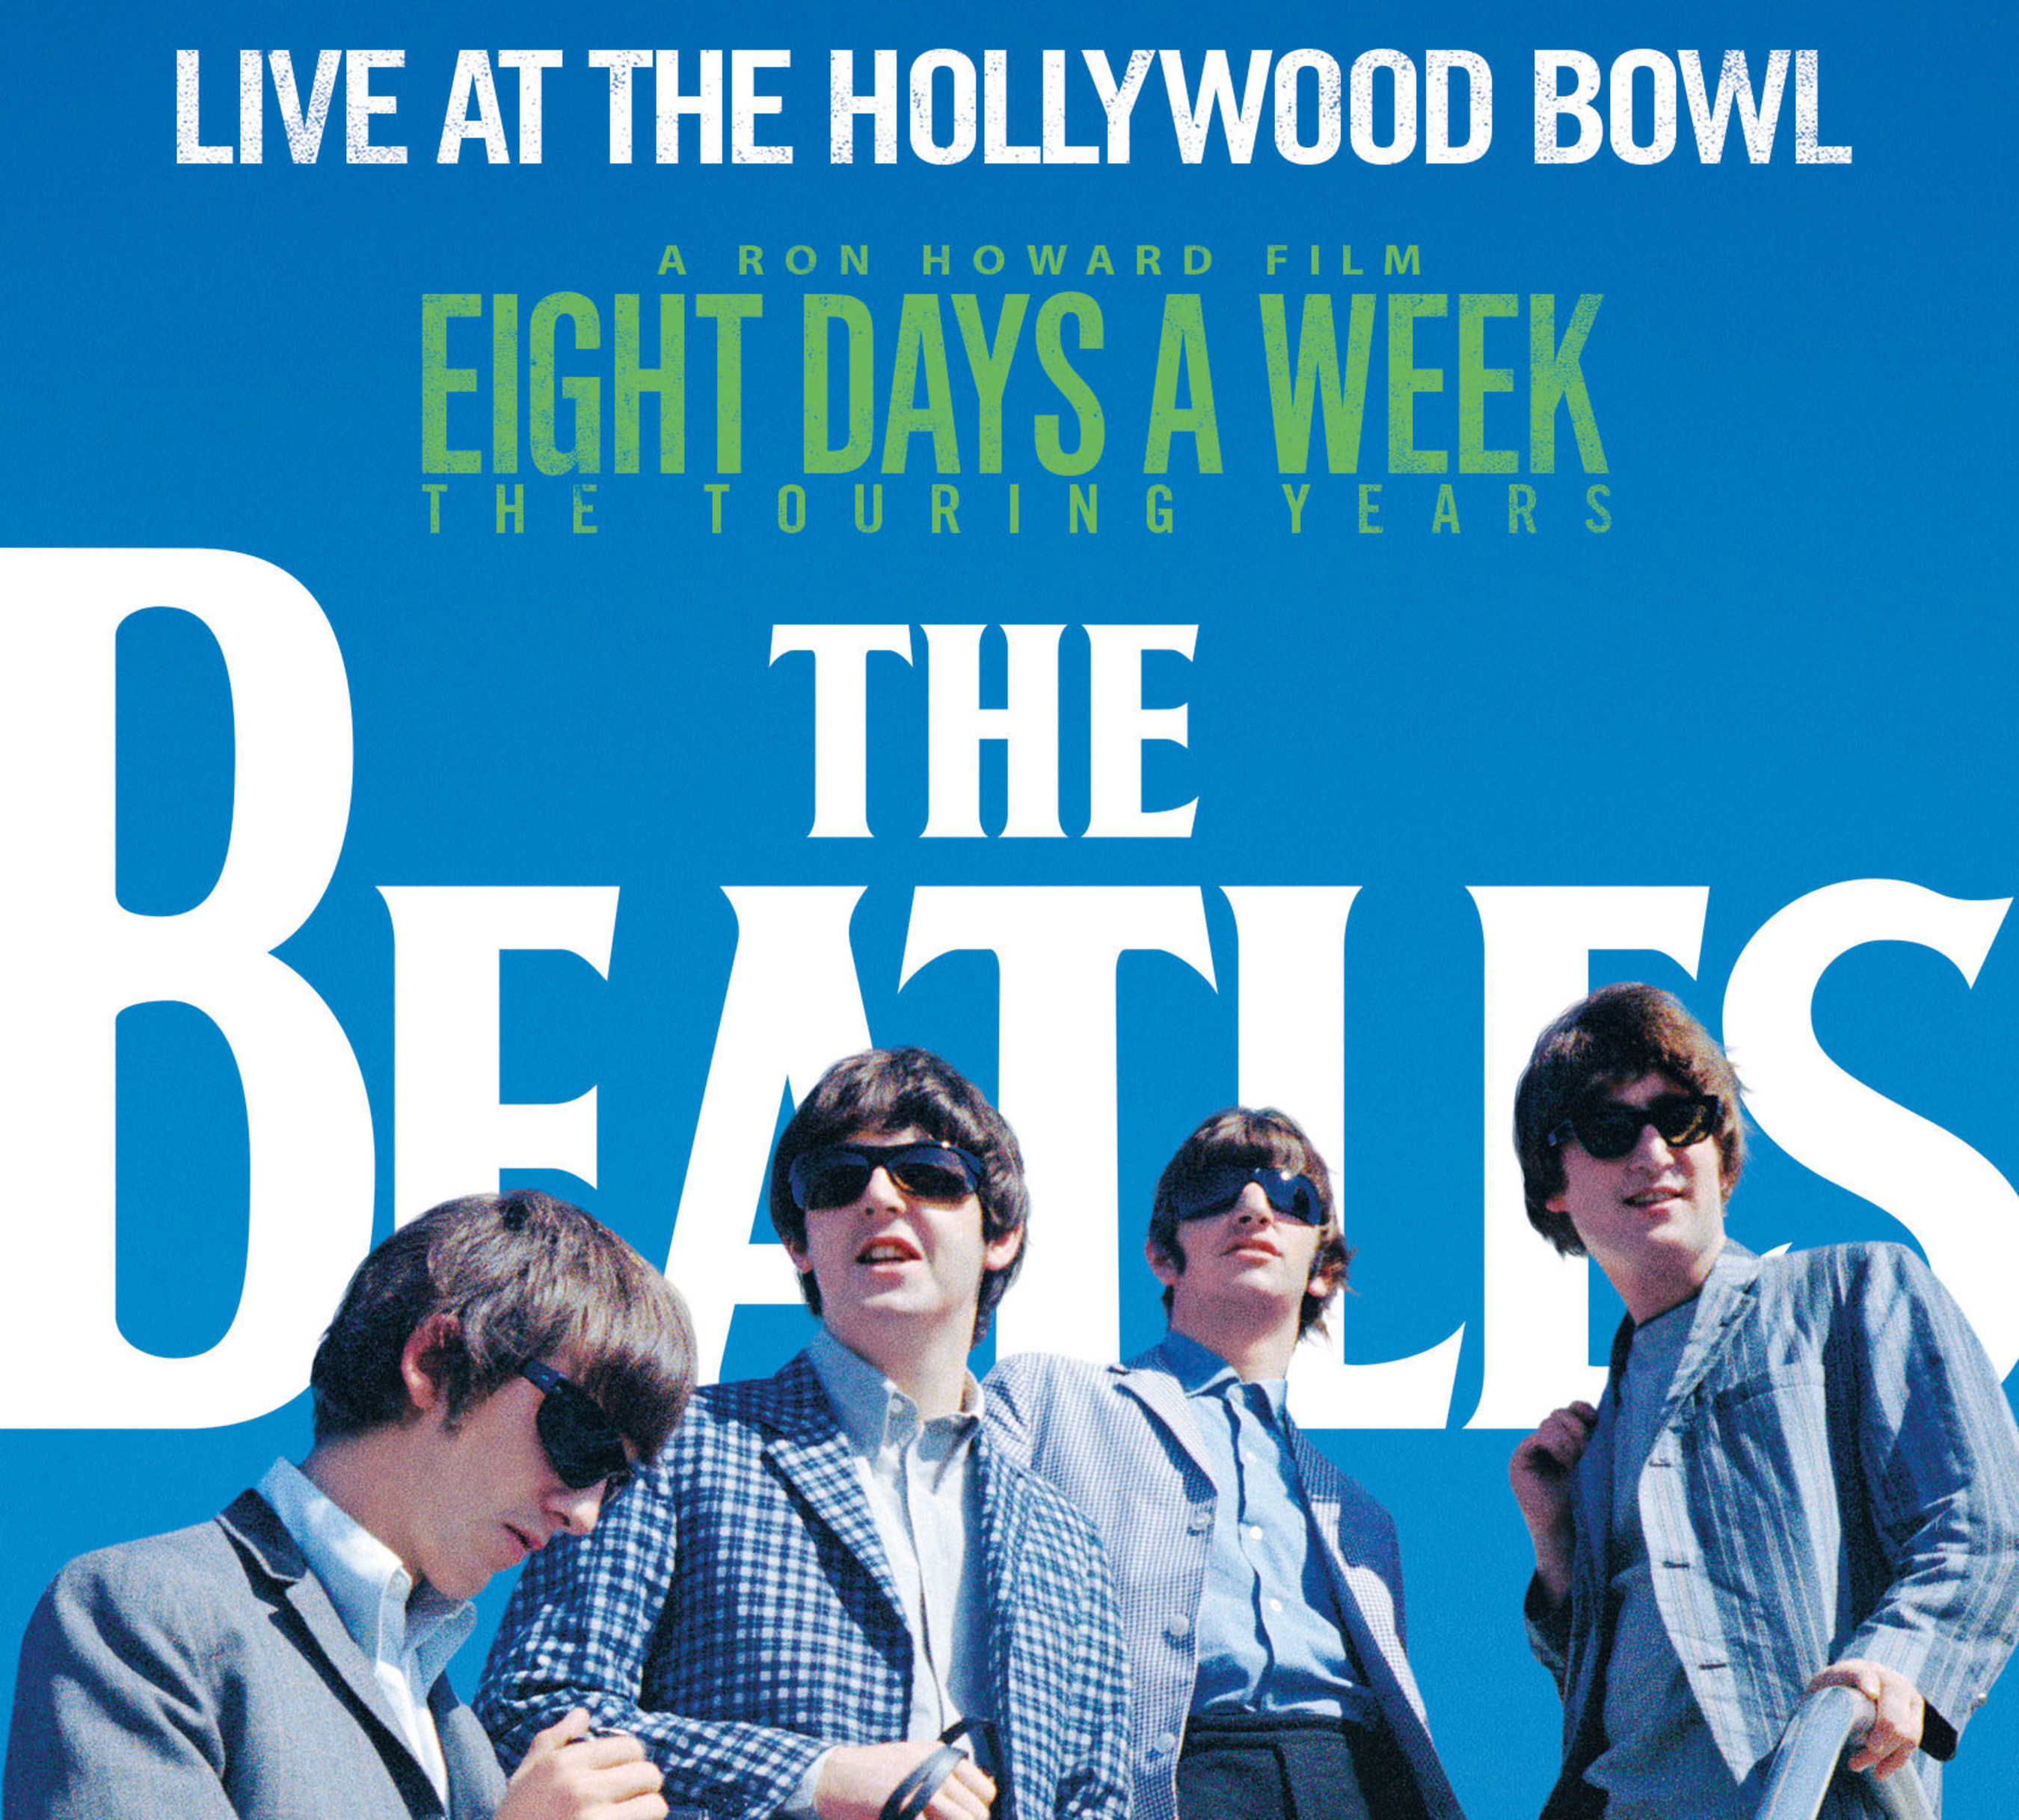 Apple Corps Ltd. and Universal Music Group are pleased to announce global release plans for 'The Beatles: Live At The Hollywood Bowl,' a new album that captures the joyous exuberance of the band's three sold-out concerts at Los Angeles' Hollywood Bowl in 1964 and 1965. A companion to 'The Beatles: Eight Days A Week - The Touring Years,' Academy Award(R)-winner Ron Howard's authorized and highly anticipated documentary feature film about the band's early career, 'The Beatles: Live At The Hollywood Bowl' will be released worldwide on CD and for digital download and streaming on September 9.